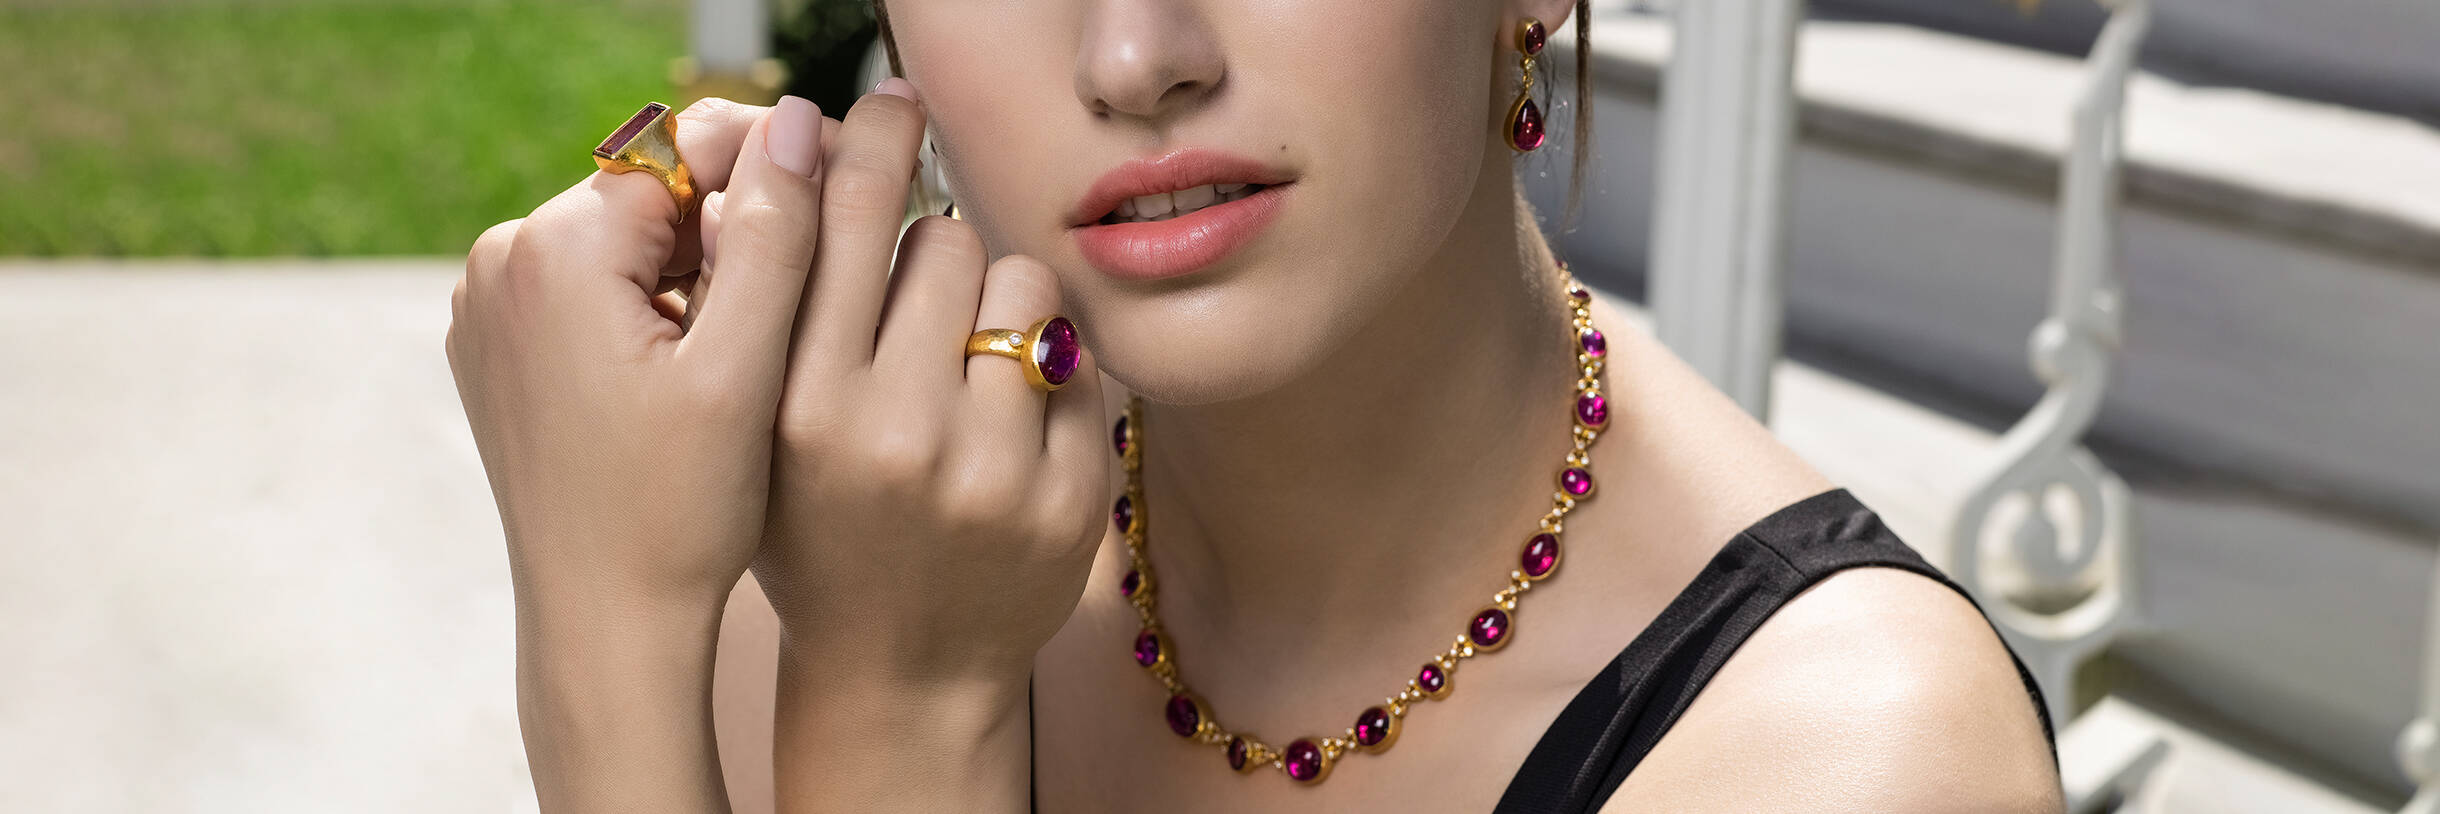 How to Care For Your Jewelry